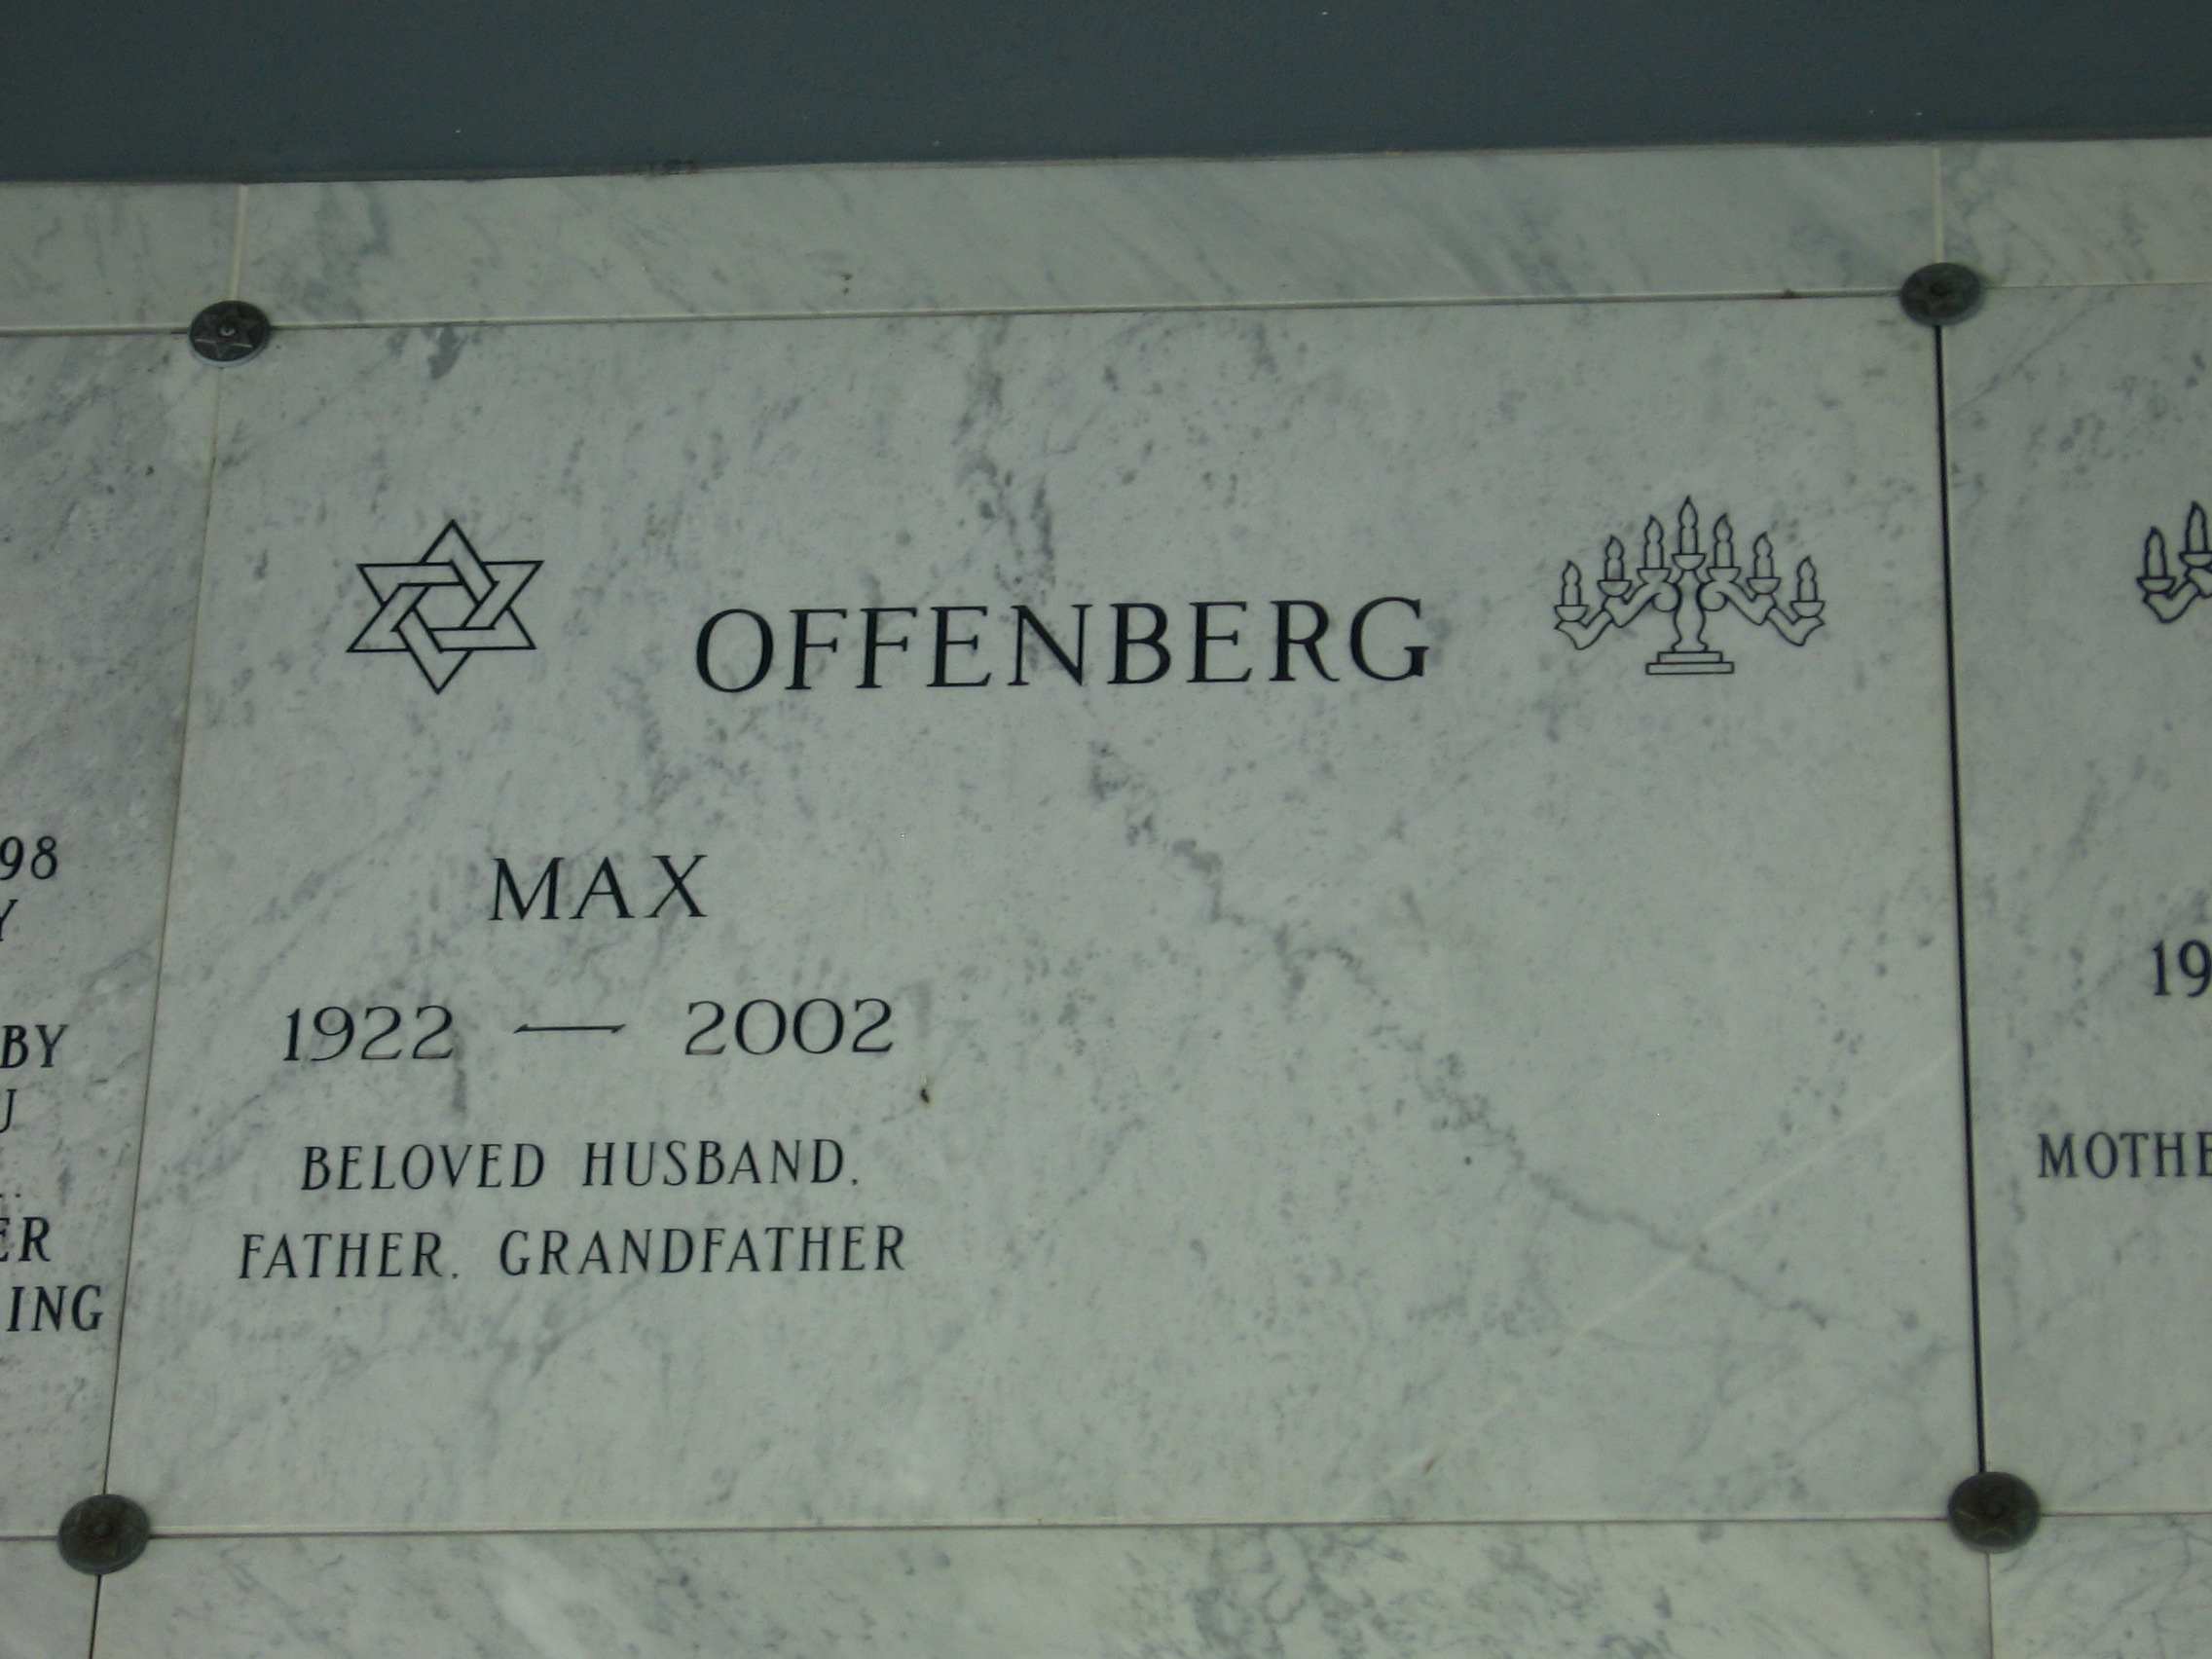 Max Offenberg